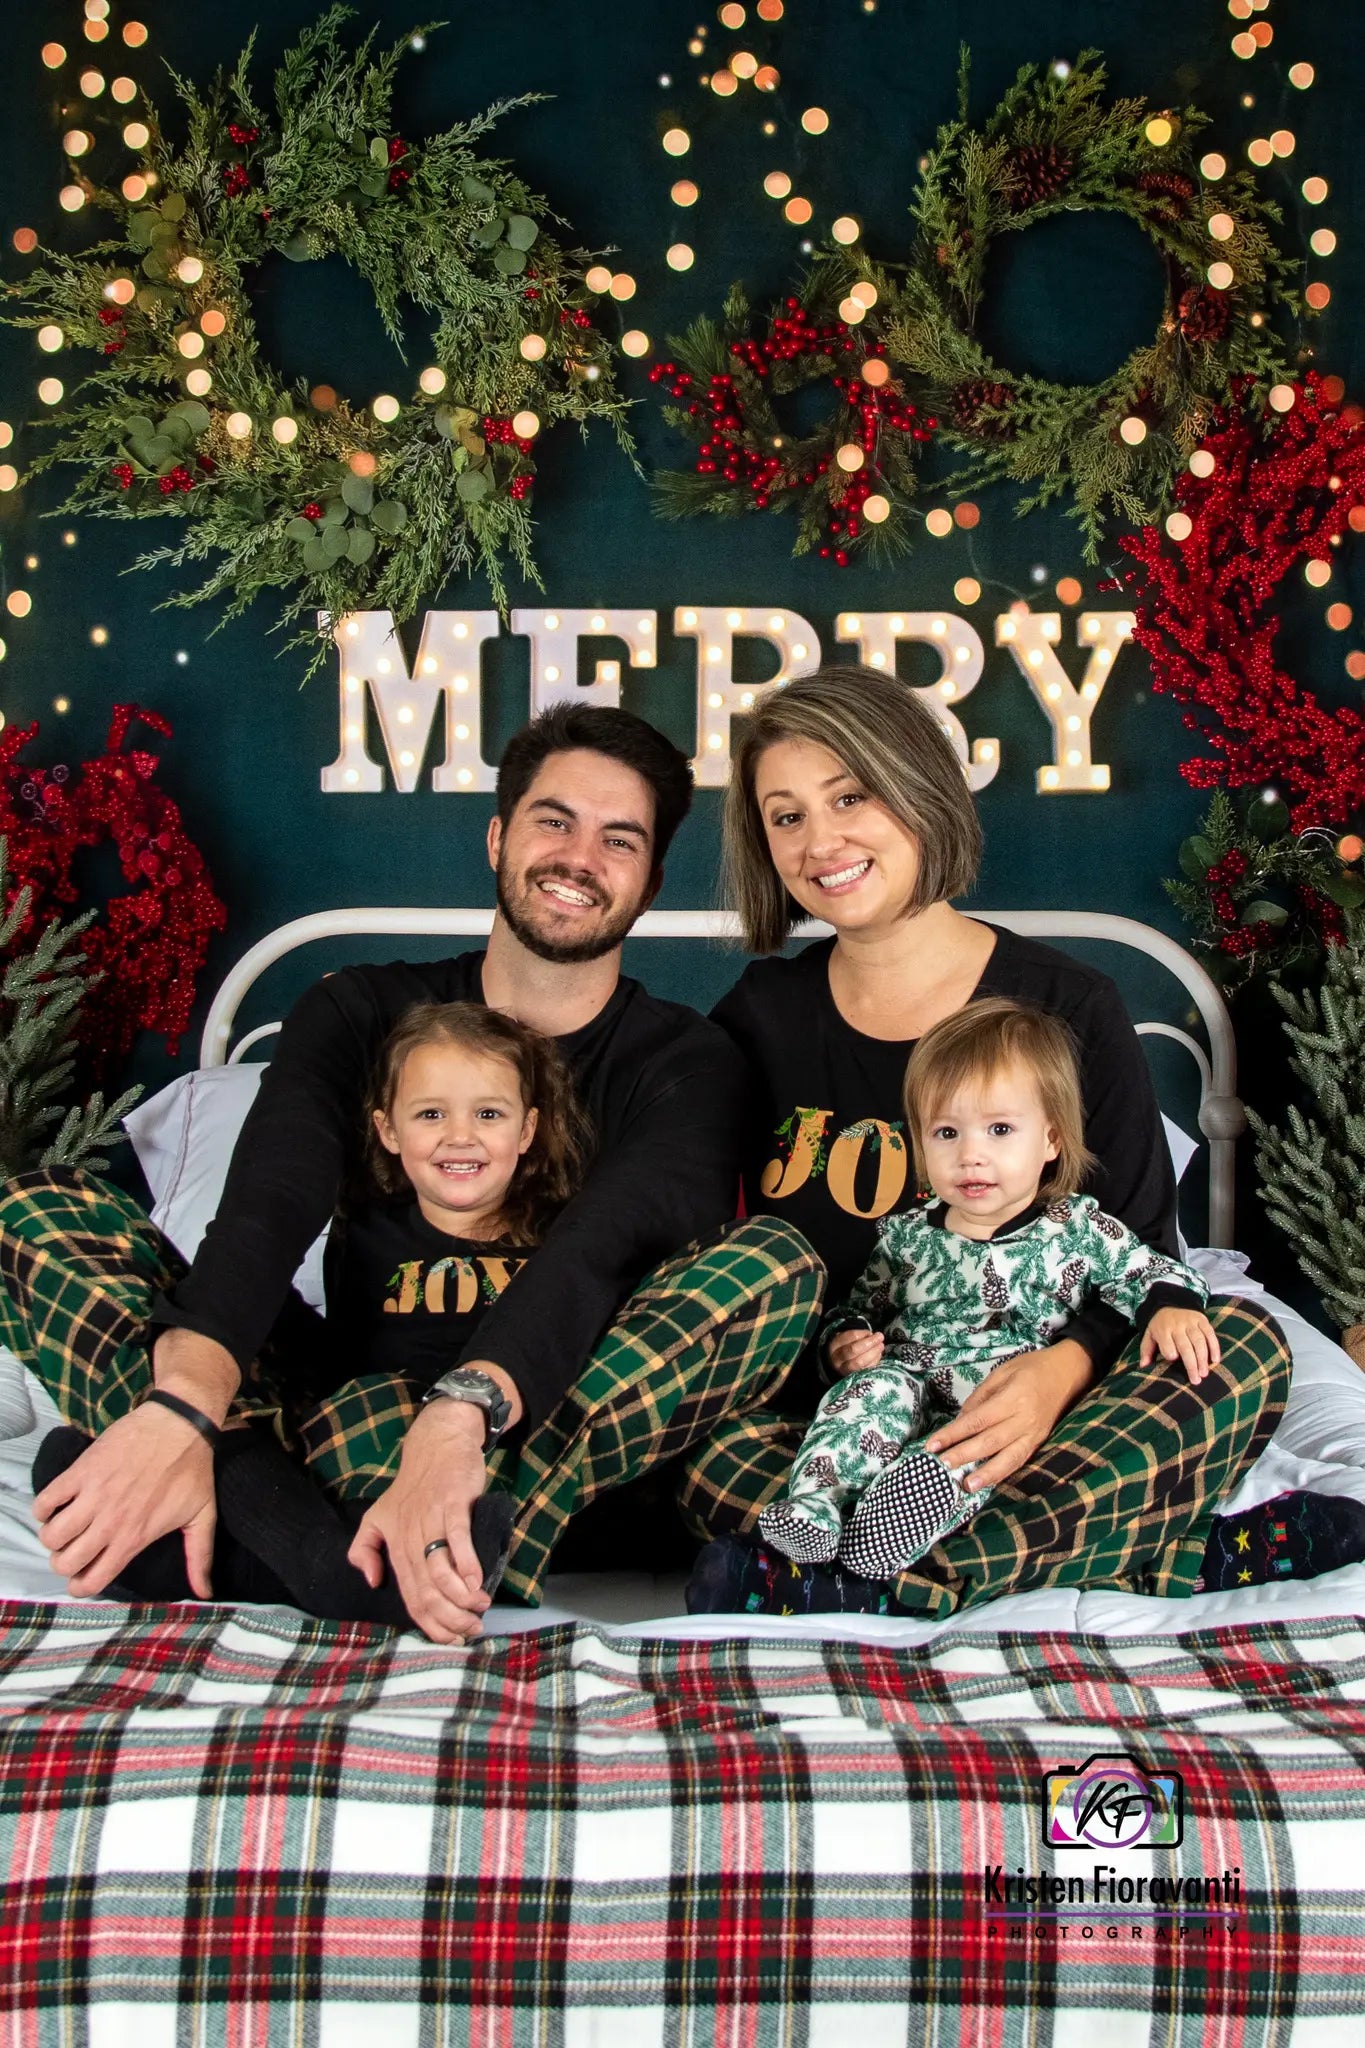 Kate Merry Christmas Backdrop Sparkle Headboard Designed By Mandy Ringe Photography